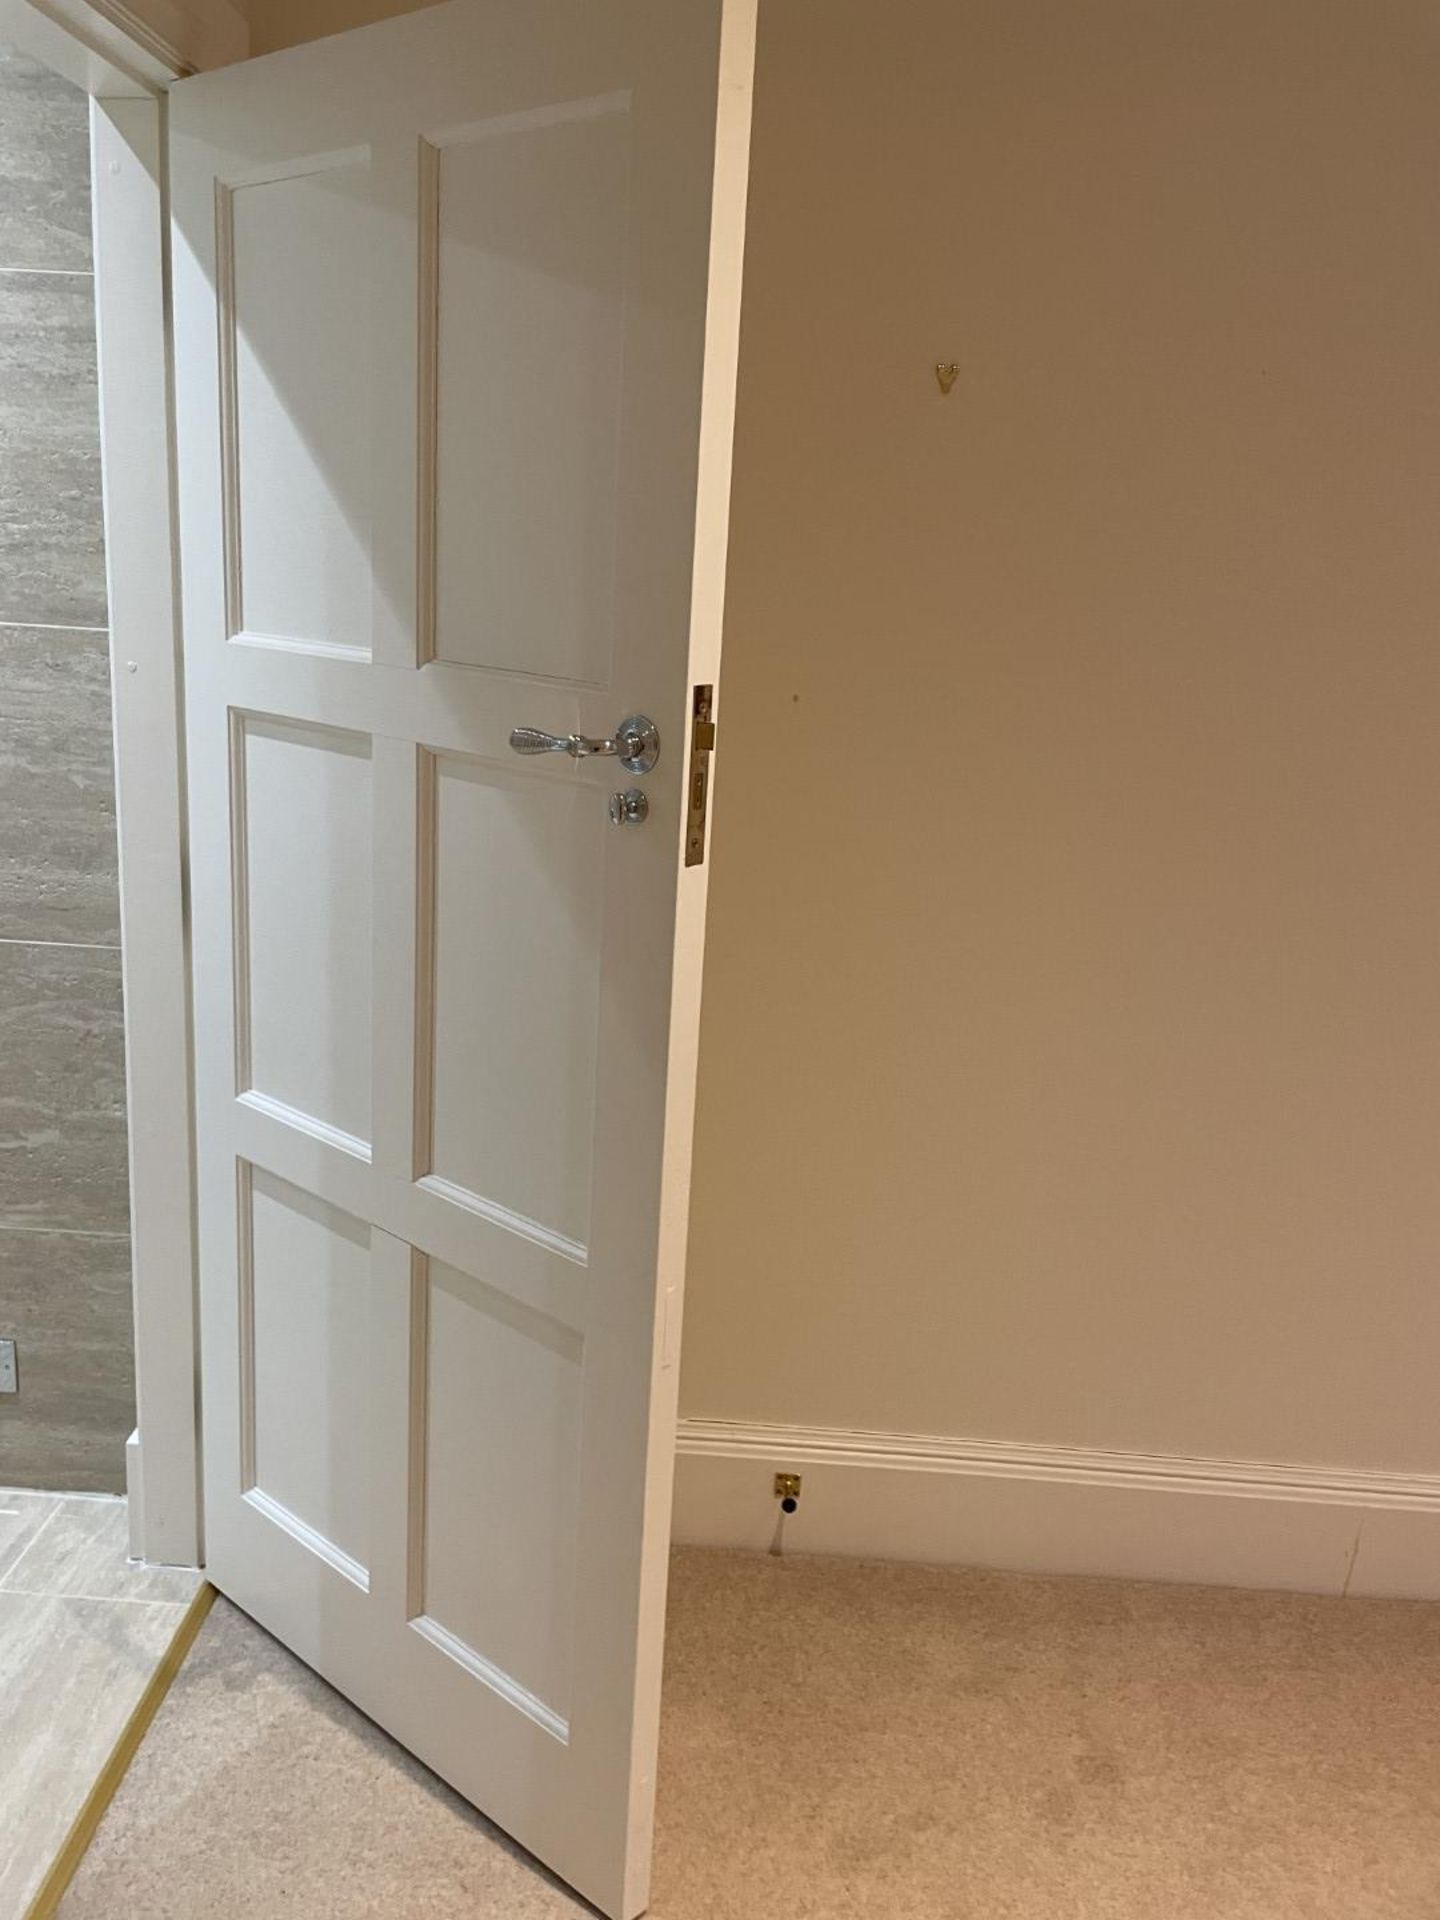 1 x Solid Wood Painted Lockable Internal Door in White - Includes Handles and Hinges - Image 12 of 12